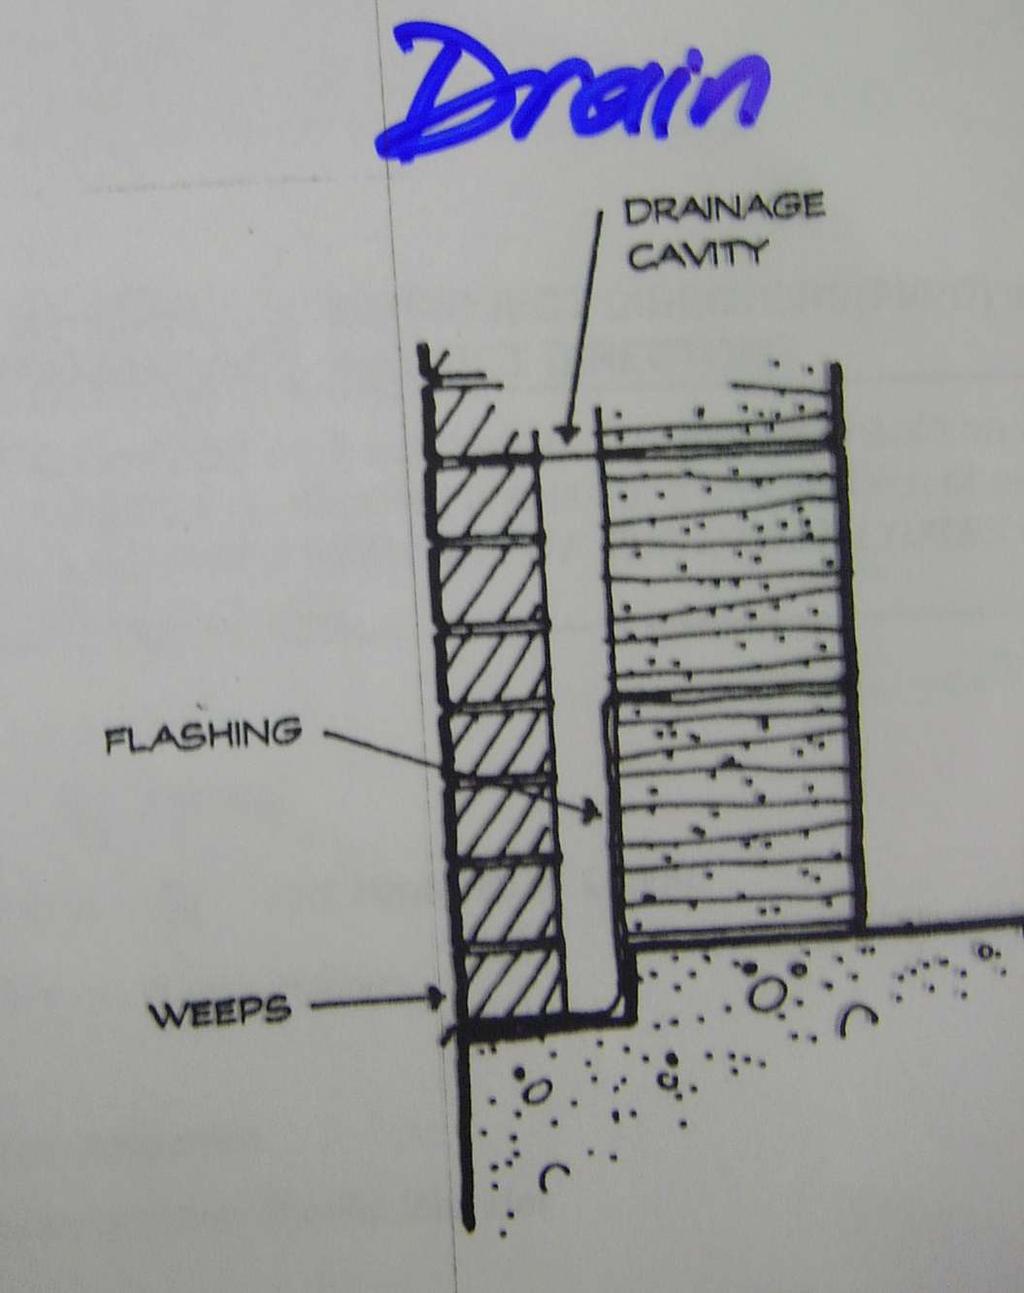 Drainage Systems For cavity (1) walls, any water penetration through cracks/capillary suction of porous materials is interrupted